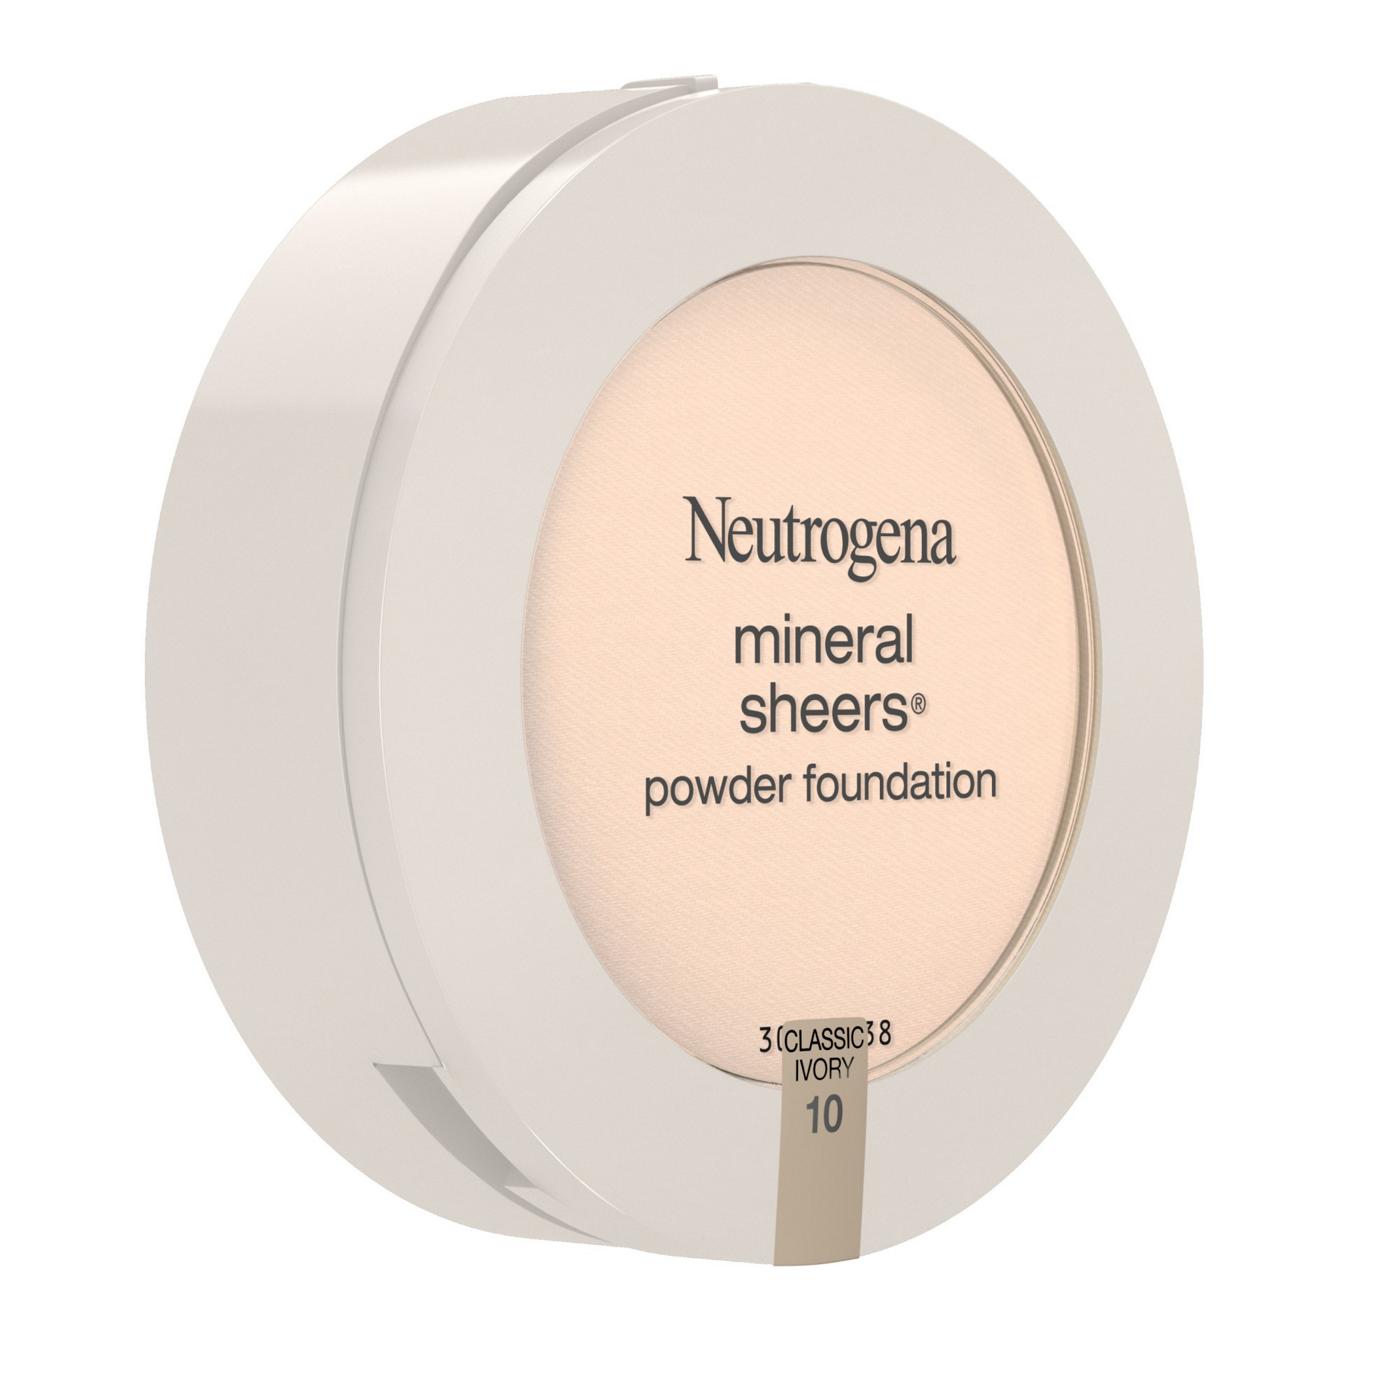 Neutrogena Mineral Sheers 10 Classic Ivory Compact Powder Foundation; image 3 of 6